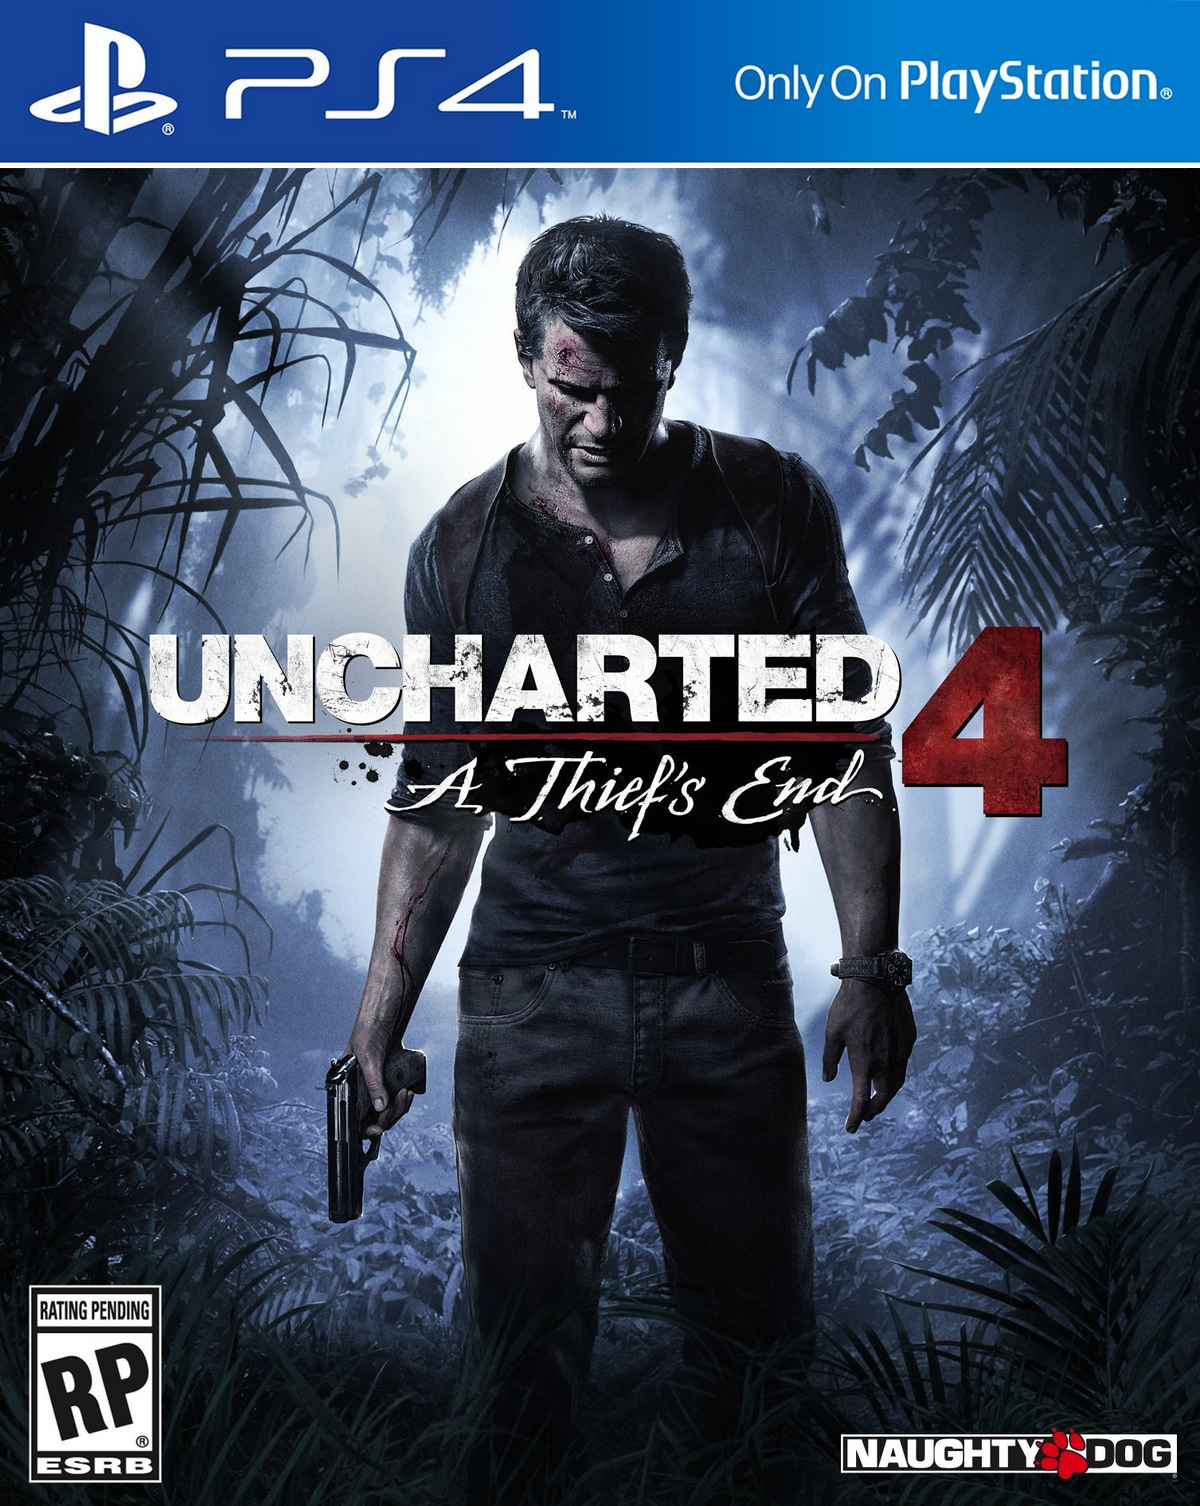 Uncharted: Drake's Fortune Original Soundtrack from the Video Game -  Wikipedia